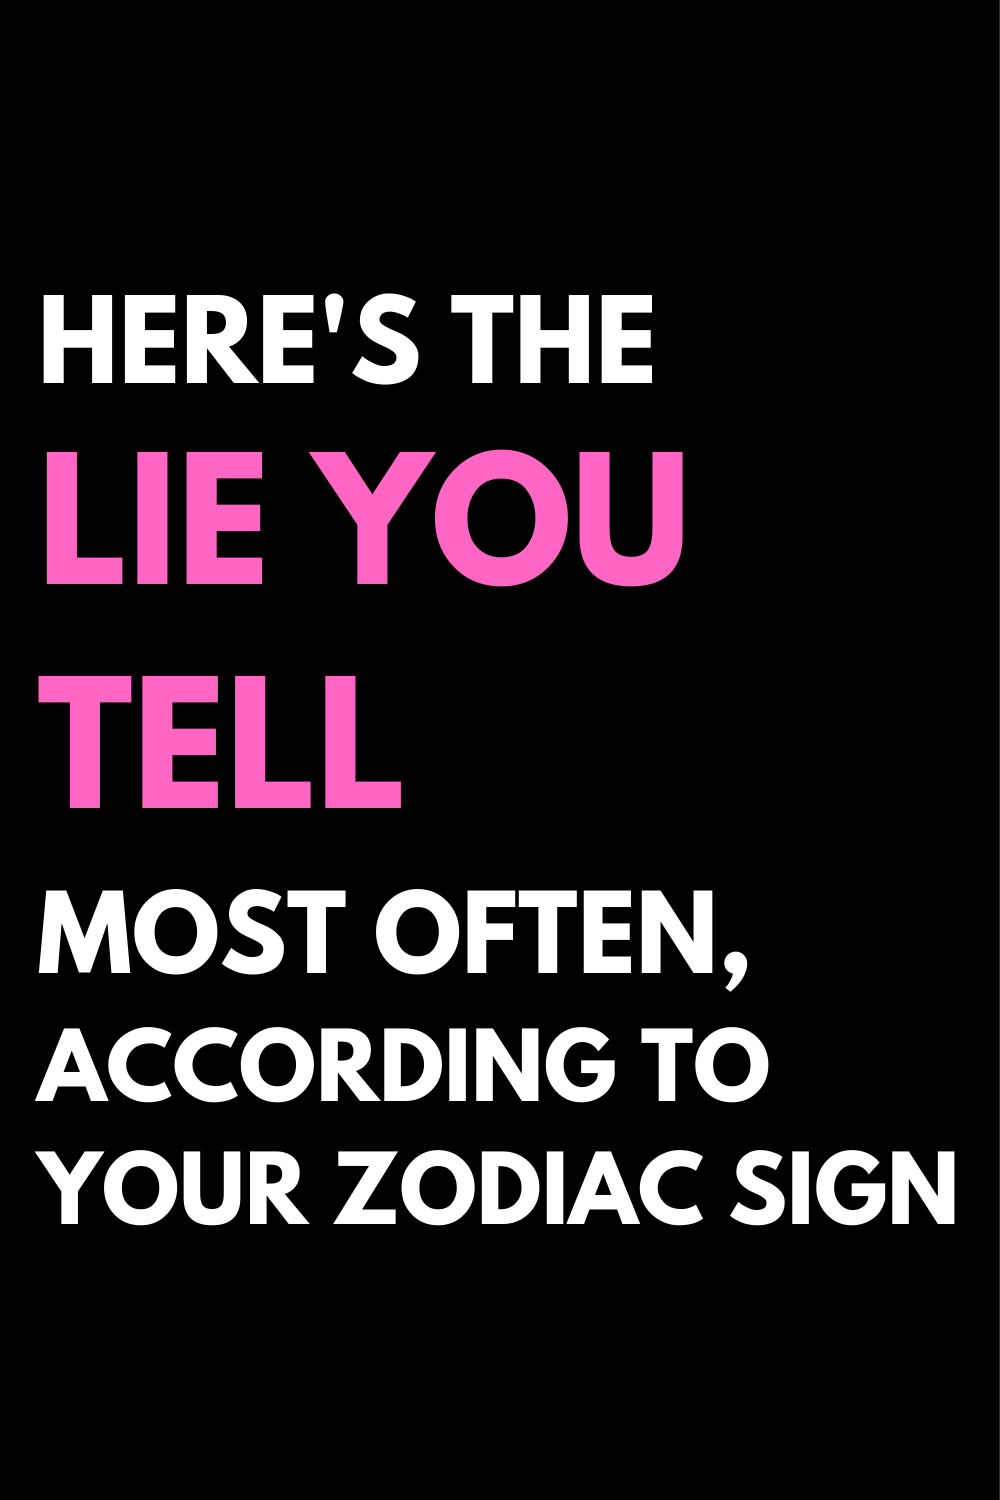 Here's The Lie You Tell Most Often, According To Your Zodiac Sign